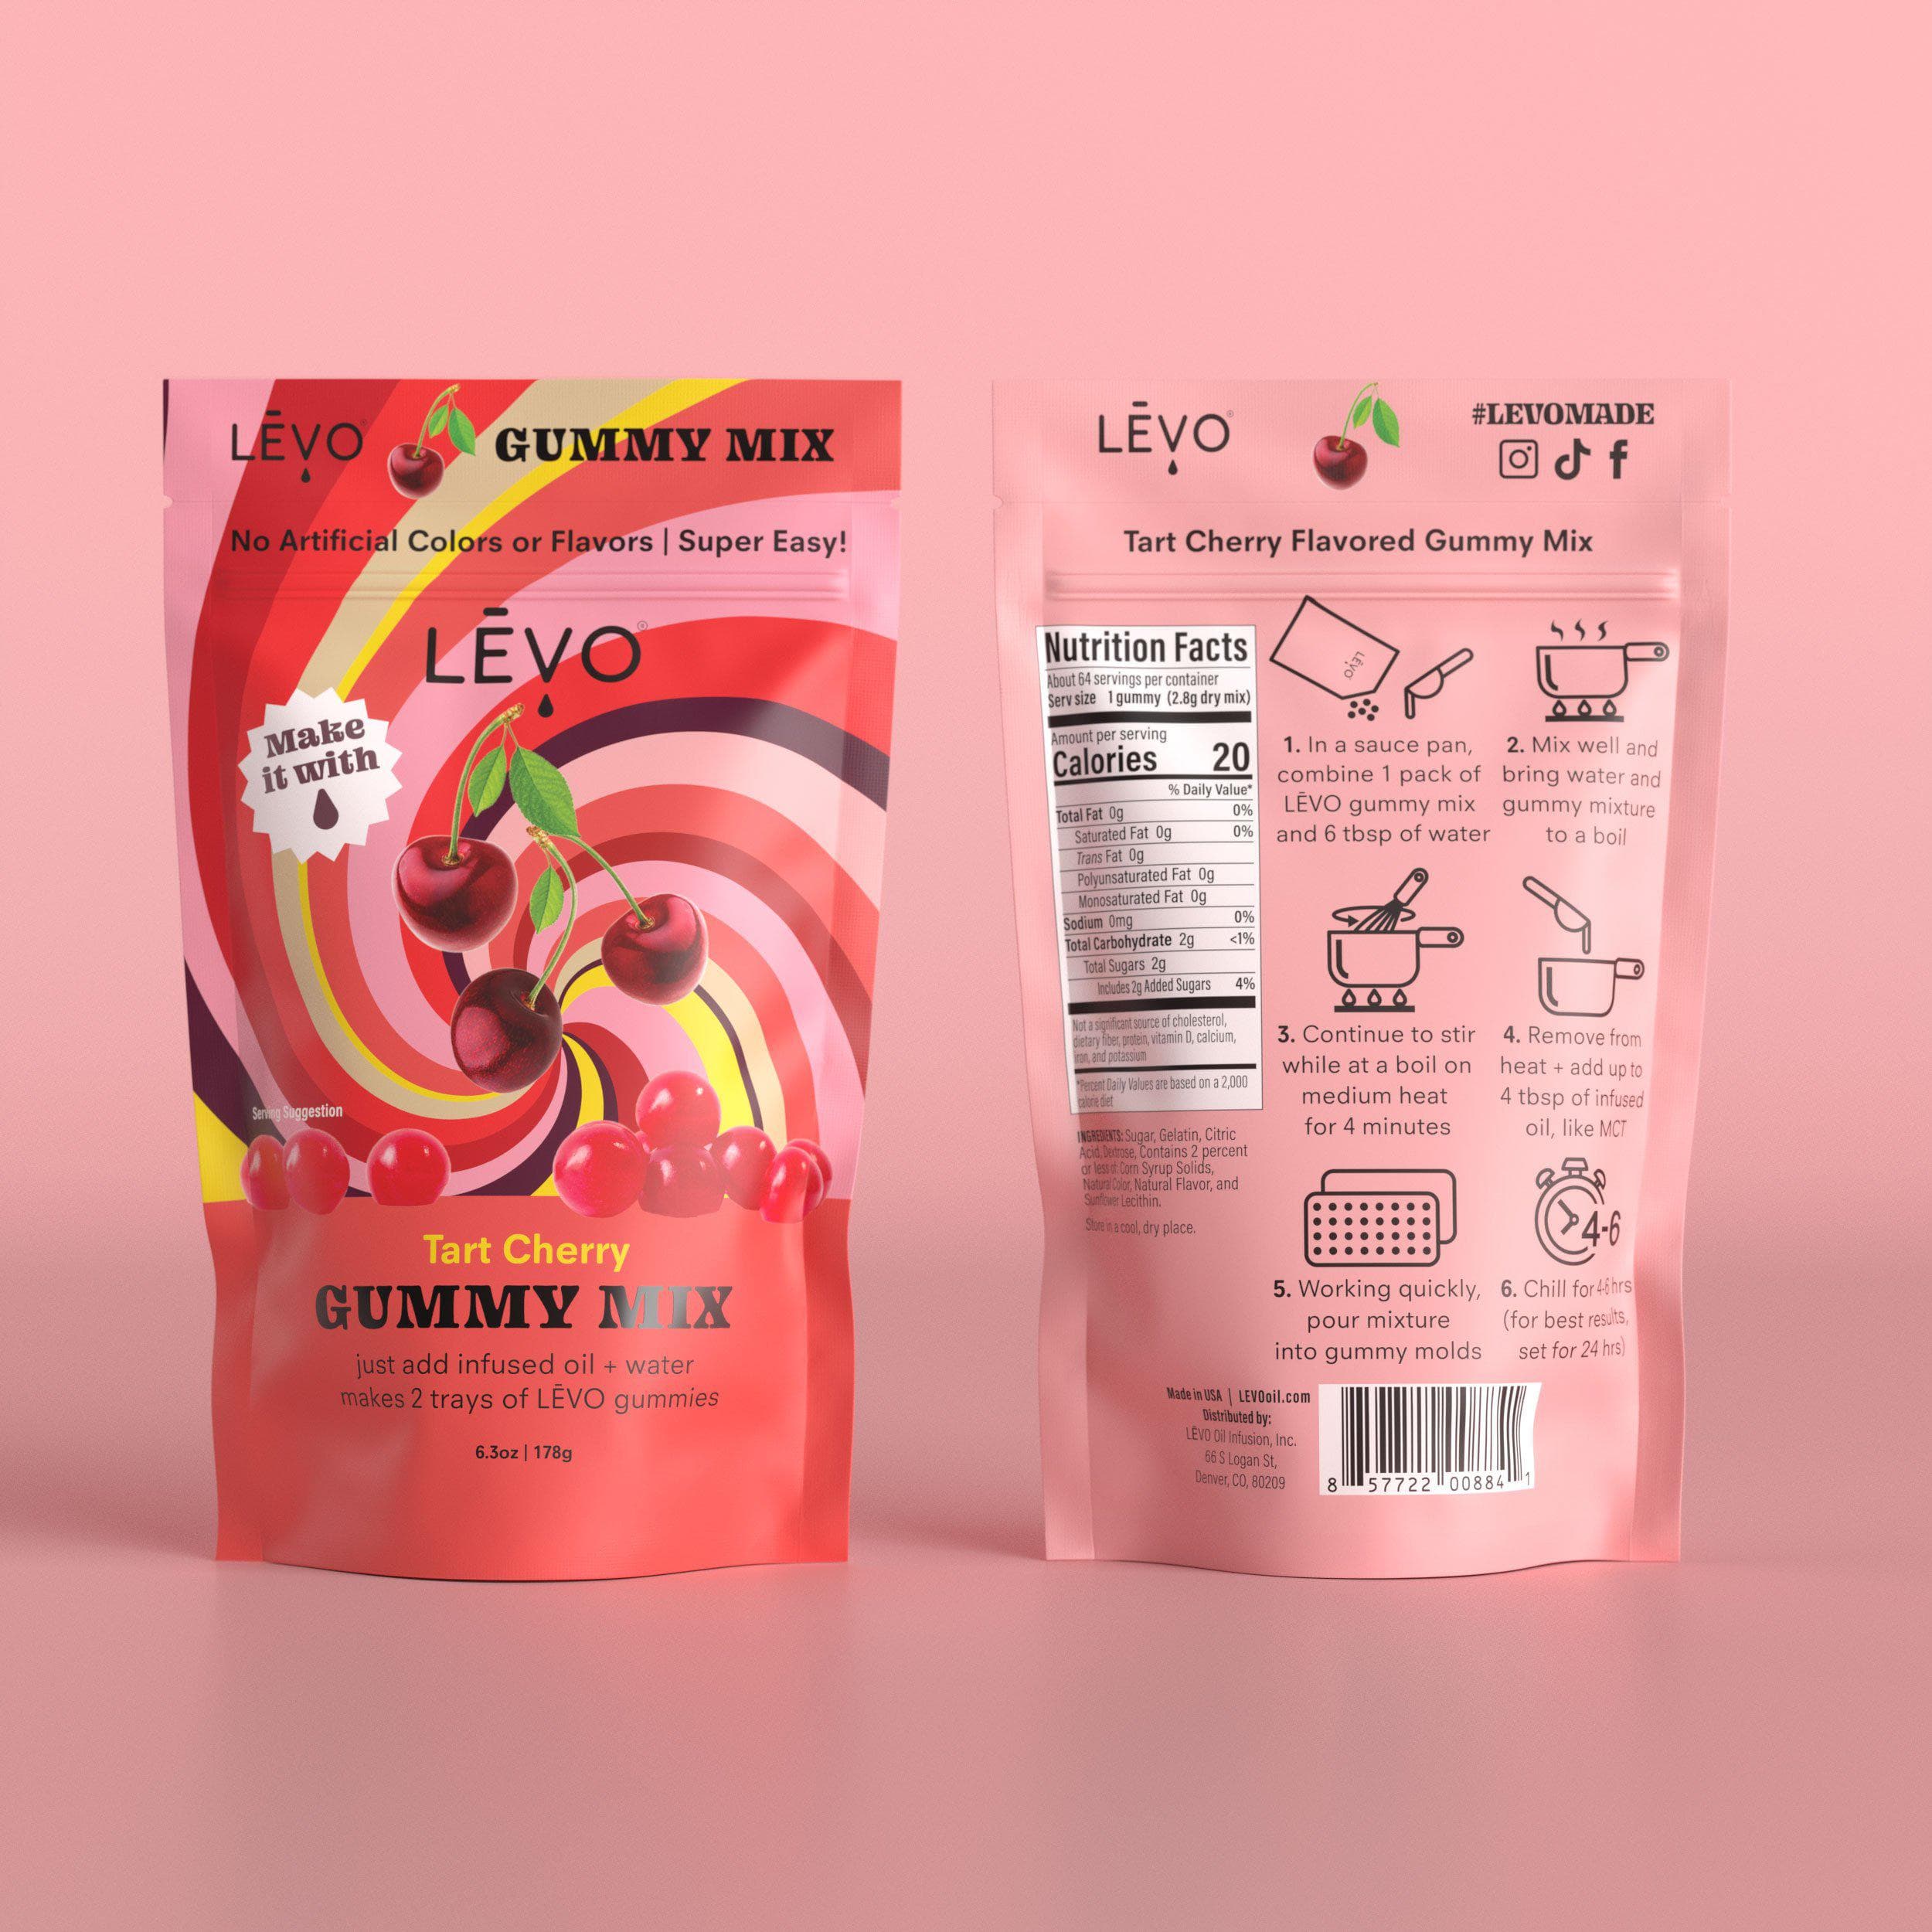 LEVO Tart Cherry Gummy Mix in our Gummy Mix Two Pack. Elevate your edibles.